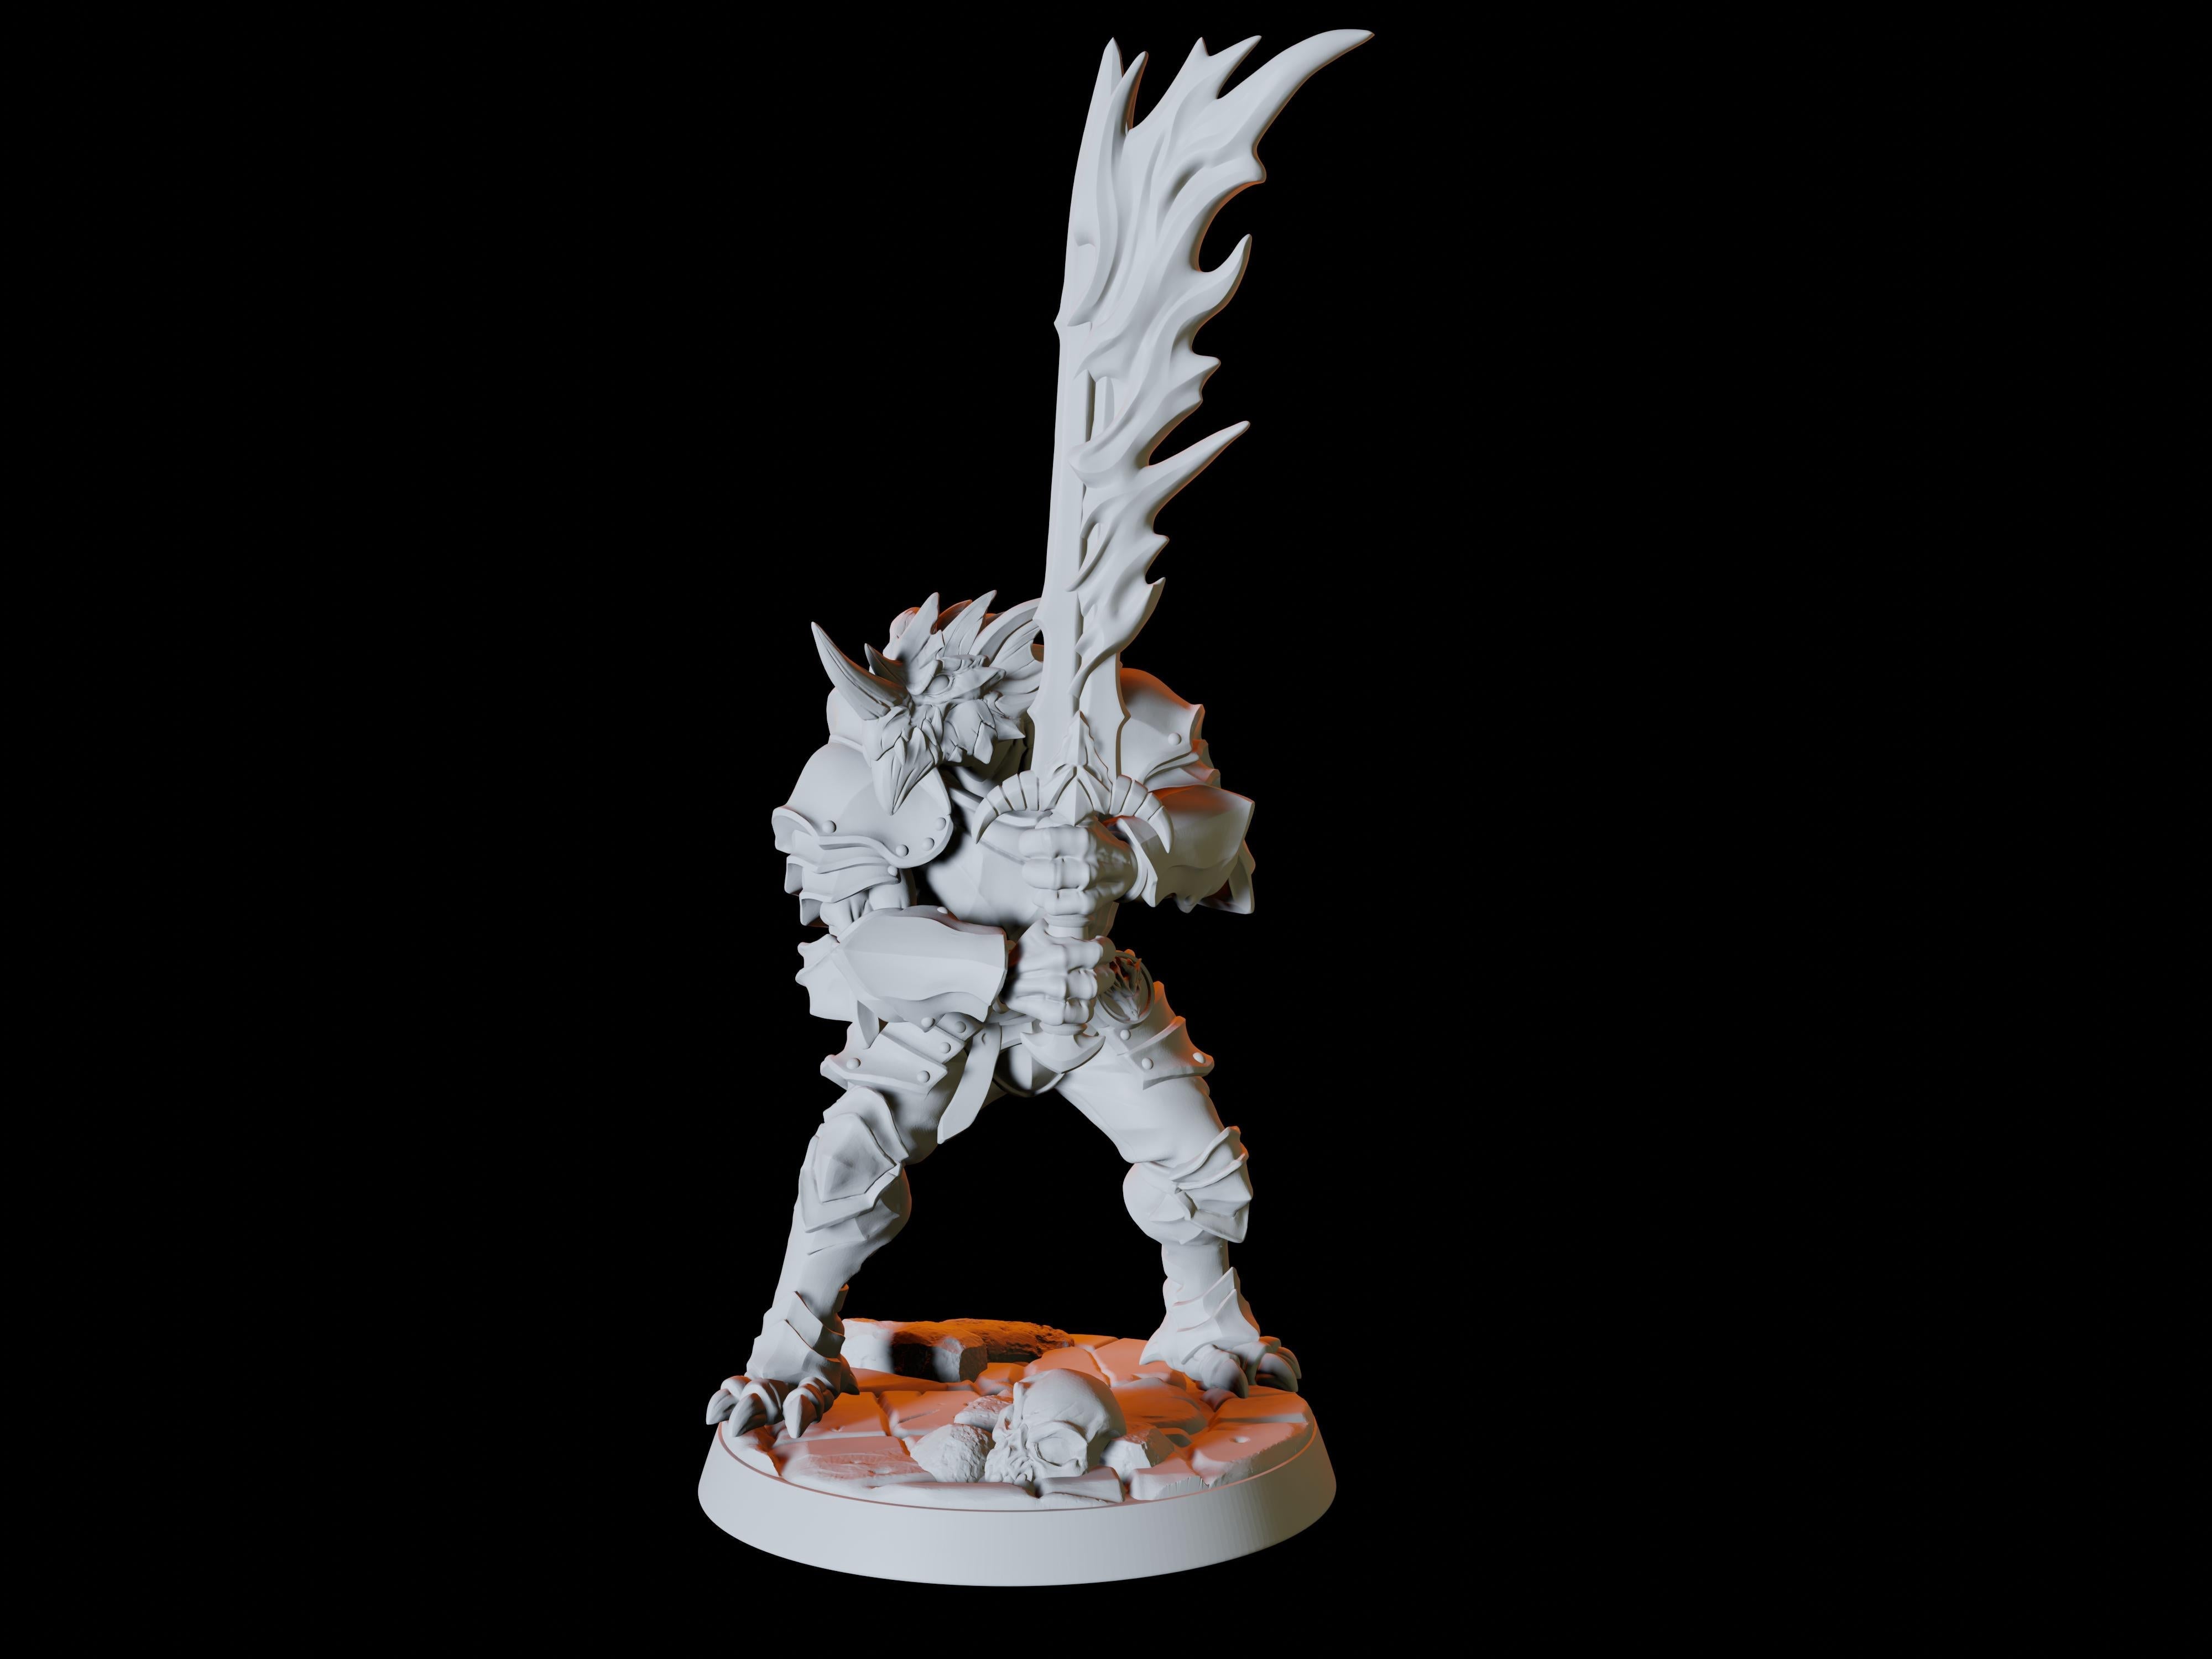 Dragonborn Solider with Double Handed Flaming Sword Miniature for Dungeons and Dragons